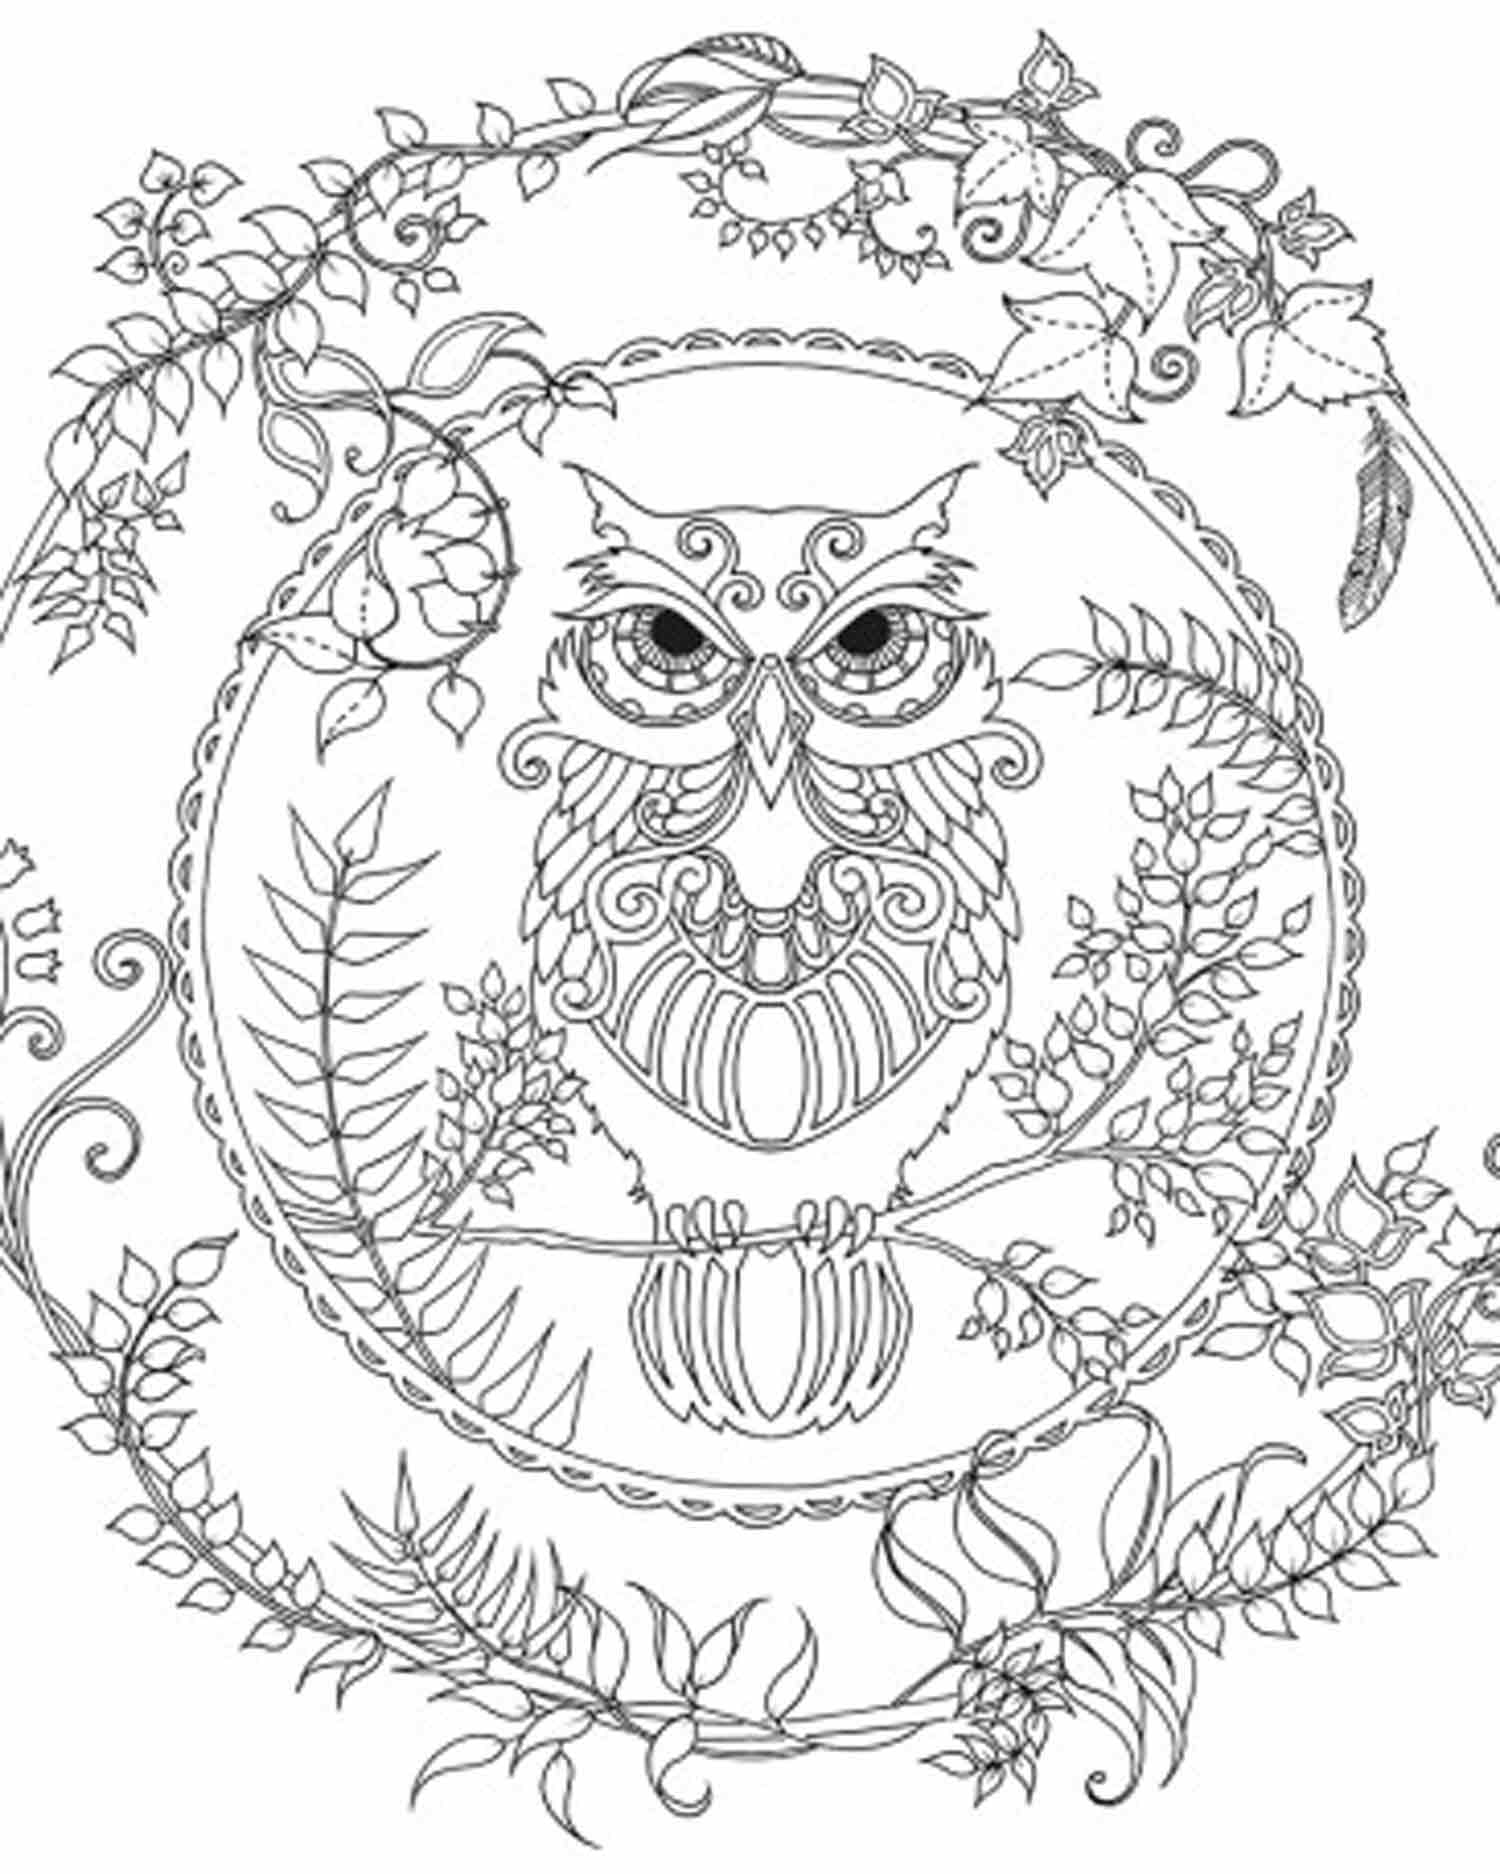 Owl Coloring Page – Adult Coloring Club